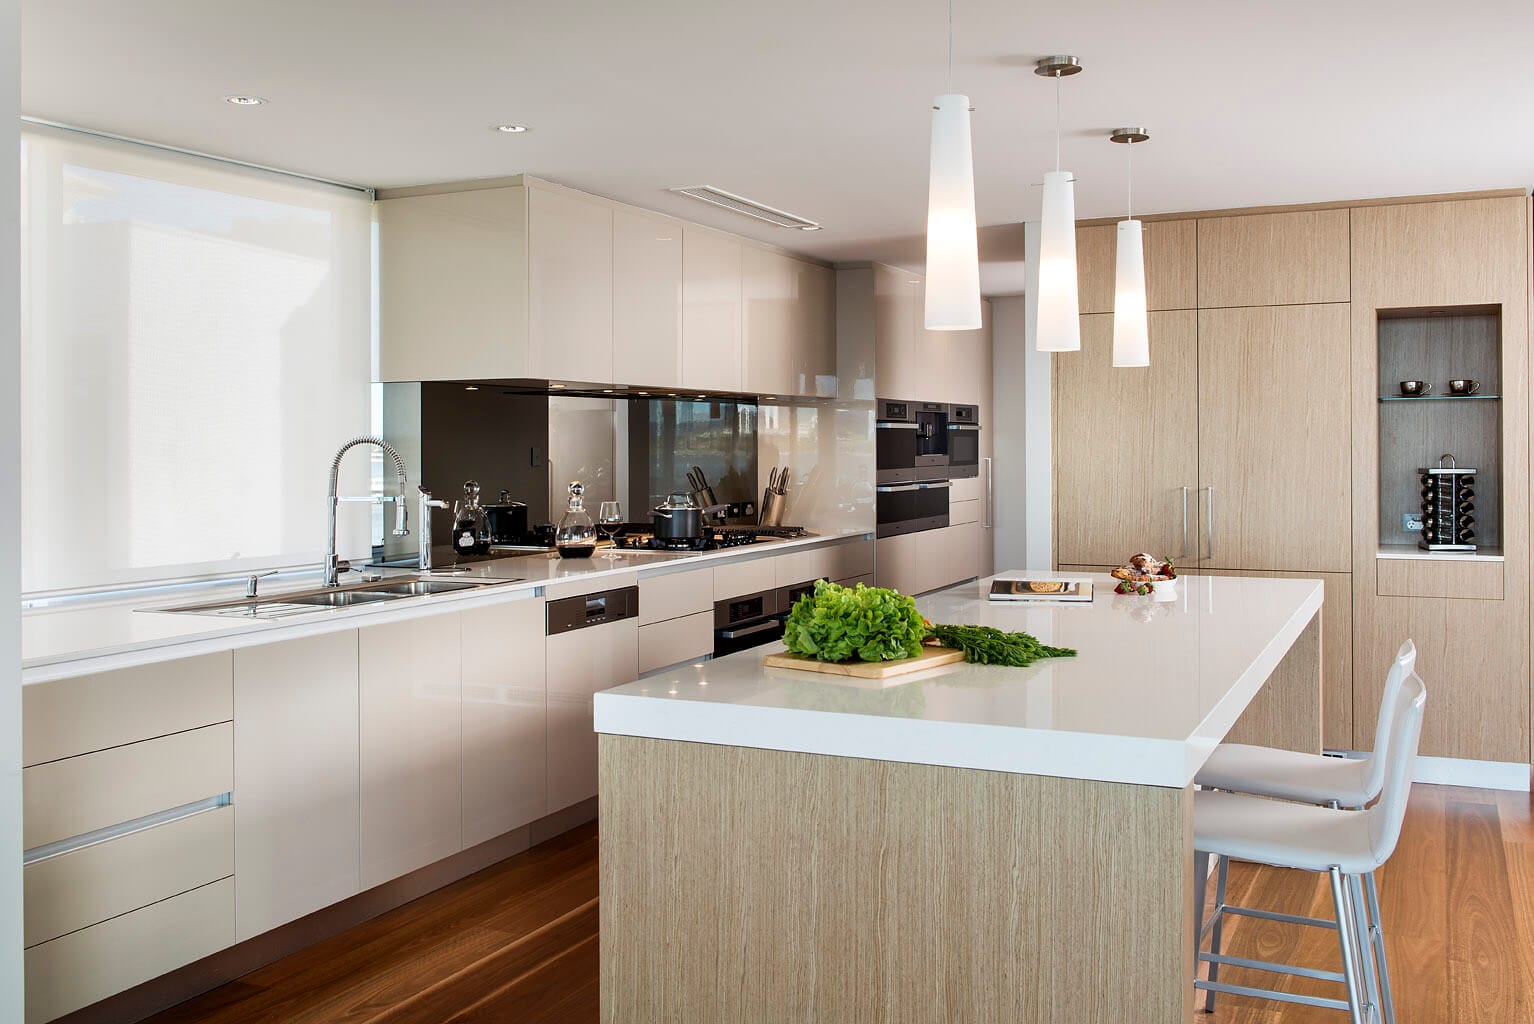 How To Add Personality To Your Neutral Kitchen